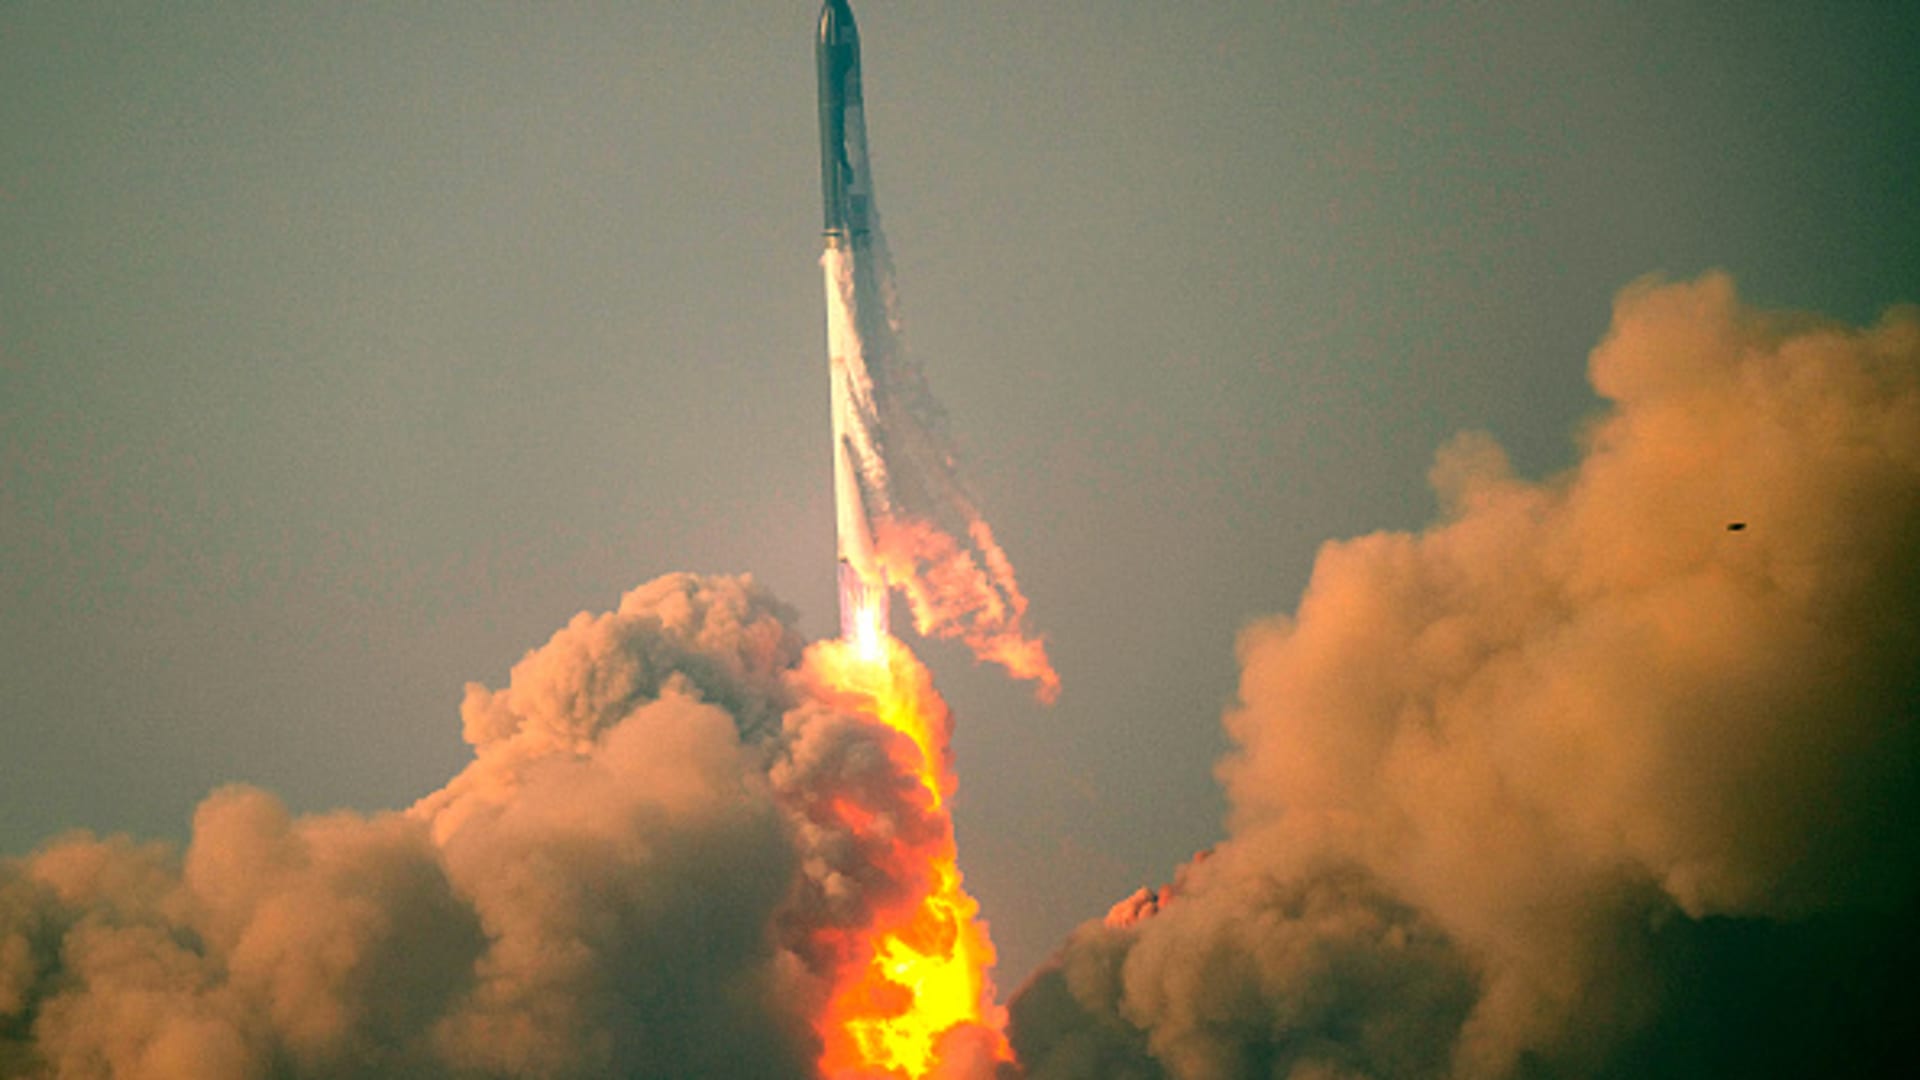 SpaceX is not yet cleared for another Starship Super Heavy test flight